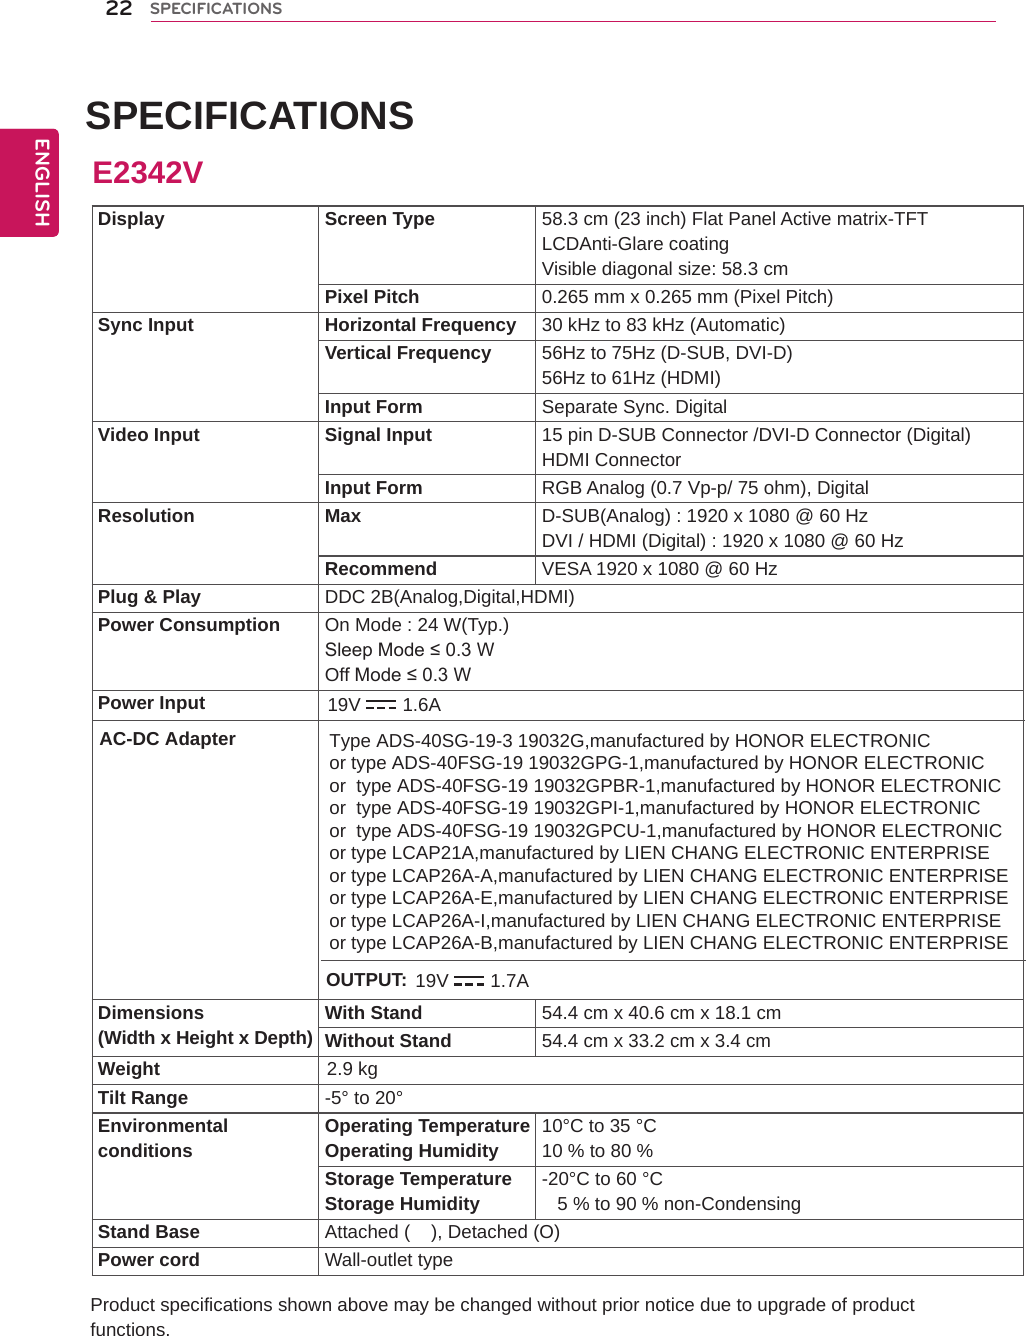 SPECIFICATIONS    Product specifications shown above may be changed without prior notice due to upgrade of product functions.Display Screen Type 58.3 cm (23 inch) Flat Panel Active matrix-TFT LCDAnti-Glare coatingVisible diagonal size: 58.3 cmPixel Pitch 0.265 mm x 0.265 mm (Pixel Pitch)Sync Input Horizontal Frequency 30 kHz to 83 kHz (Automatic)Vertical Frequency 56Hz to 75Hz (D-SUB, DVI-D)56Hz to 61Hz (HDMI)Input Form Separate Sync. DigitalVideo Input Signal Input 15 pin D-SUB Connector /DVI-D Connector (Digital)HDMI ConnectorInput Form RGB Analog (0.7 Vp-p/ 75 ohm), DigitalResolution Max D-SUB(Analog) : 1920 x 1080 @ 60 HzDVI / HDMI (Digital) : 1920 x 1080 @ 60 HzRecommend VESA 1920 x 1080 @ 60 HzPlug &amp; Play DDC 2B(Analog,Digital,HDMI)Power Consumption On Mode : 24 W(Typ.)Sleep Mode ≤ 0.3 W Off Mode ≤ 0.3 W Power InputDimensions(Width x Height x Depth) With Stand 54.4 cm x 40.6 cm x 18.1 cmWithout Stand 54.4 cm x 33.2 cm x 3.4 cmWeight                                2.9 kgTilt Range -5° to 20°Environmentalconditions Operating TemperatureOperating Humidity 10°C to 35 °C10 % to 80 % Storage TemperatureStorage Humidity -20°C to 60 °C   5 % to 90 % non-CondensingStand Base Attached (    ), Detached (O)Power cord Wall-outlet typeE2342V19V 1.6AAC-DC Adapter Type ADS-40SG-19-3 19032G,manufactured by HONOR ELECTRONICor type ADS-40FSG-19 19032GPG-1,manufactured by HONOR ELECTRONICor  type ADS-40FSG-19 19032GPBR-1,manufactured by HONOR ELECTRONICor  type ADS-40FSG-19 19032GPI-1,manufactured by HONOR ELECTRONIC or  type ADS-40FSG-19 19032GPCU-1,manufactured by HONOR ELECTRONIC or type LCAP21A,manufactured by LIEN CHANG ELECTRONIC ENTERPRISEor type LCAP26A-A,manufactured by LIEN CHANG ELECTRONIC ENTERPRISEor type LCAP26A-E,manufactured by LIEN CHANG ELECTRONIC ENTERPRISEor type LCAP26A-I,manufactured by LIEN CHANG ELECTRONIC ENTERPRISEor type LCAP26A-B,manufactured by LIEN CHANG ELECTRONIC ENTERPRISEOUTPUT: 19V 1.7A22ENGENGLISHSPECIFICATIONS